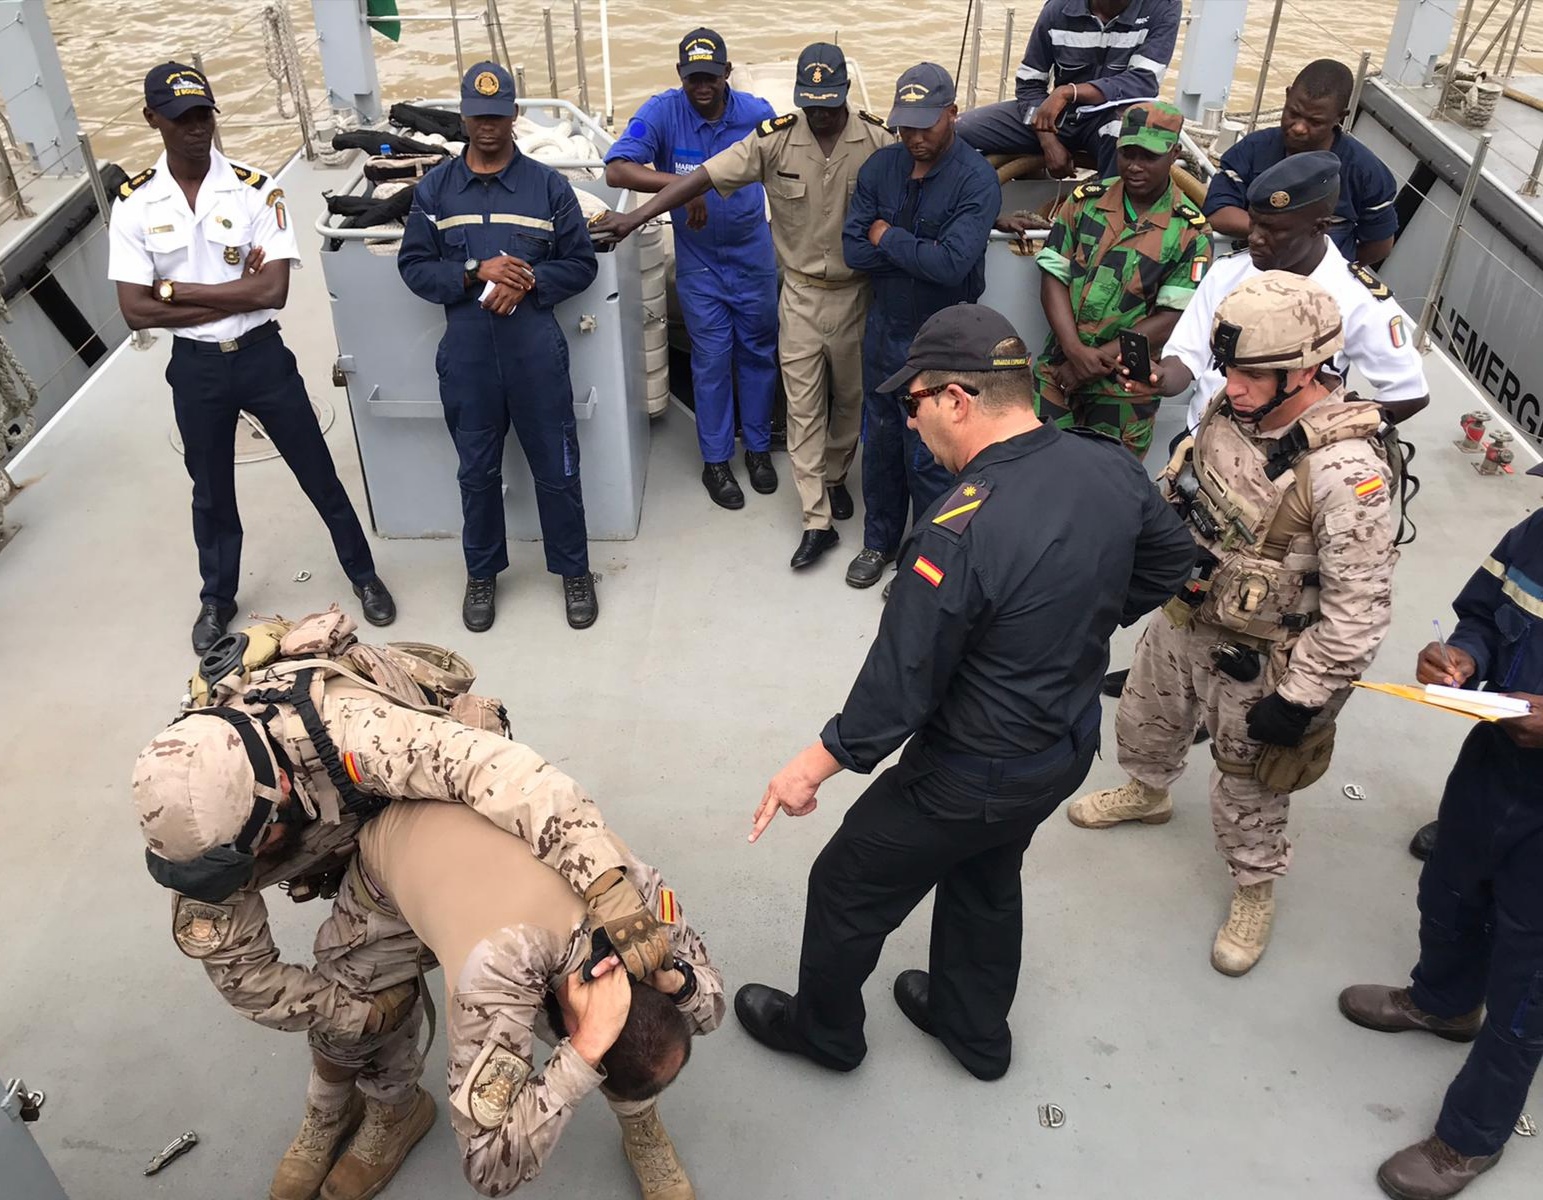 The patrol boat “Atalaya” docks at Abidjan and cooperates with the Ivory Coast Armed Forces